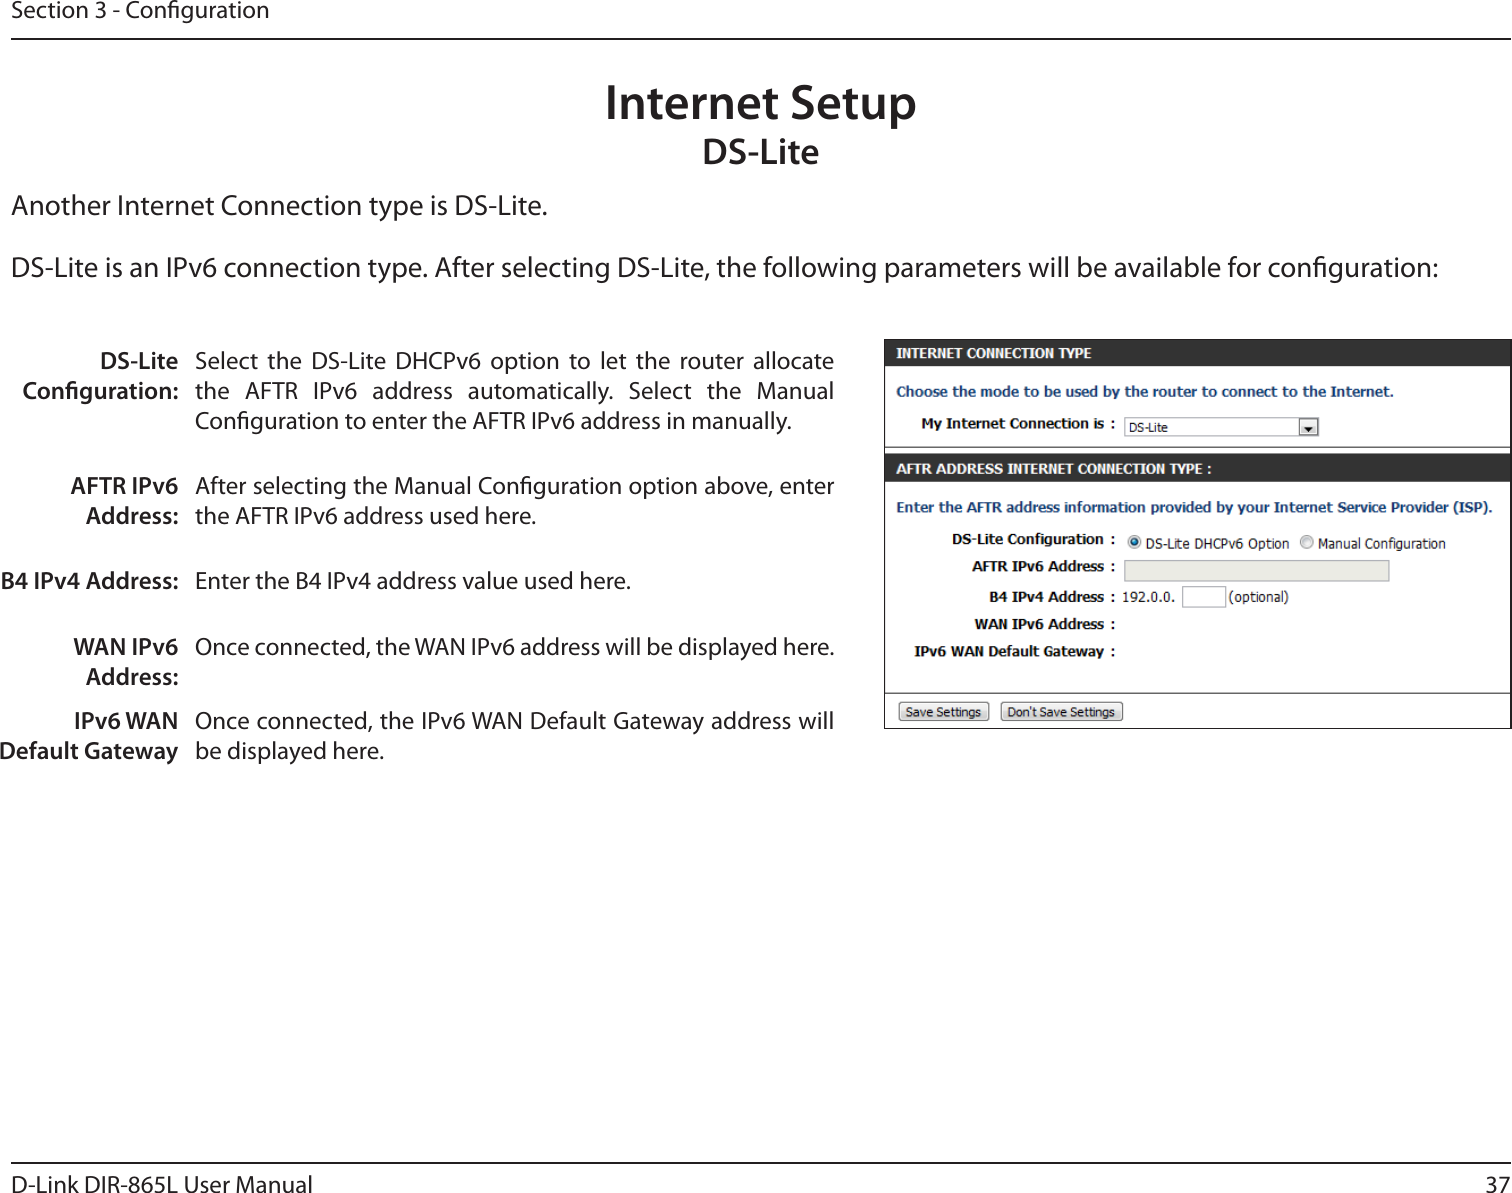 37D-Link DIR-865L User ManualSection 3 - CongurationInternet SetupDS-LiteAnother Internet Connection type is DS-Lite.DS-Lite Conguration:Select  the  DS-Lite  DHCPv6  option  to  let  the  router  allocate the  AFTR  IPv6  address  automatically.  Select  the  Manual Conguration to enter the AFTR IPv6 address in manually.AFTR IPv6 Address:After selecting the Manual Conguration option above, enter the AFTR IPv6 address used here.B4 IPv4 Address: Enter the B4 IPv4 address value used here.WAN IPv6 Address:Once connected, the WAN IPv6 address will be displayed here.IPv6 WAN Default GatewayOnce connected, the IPv6 WAN Default Gateway address will be displayed here.DS-Lite is an IPv6 connection type. After selecting DS-Lite, the following parameters will be available for conguration: